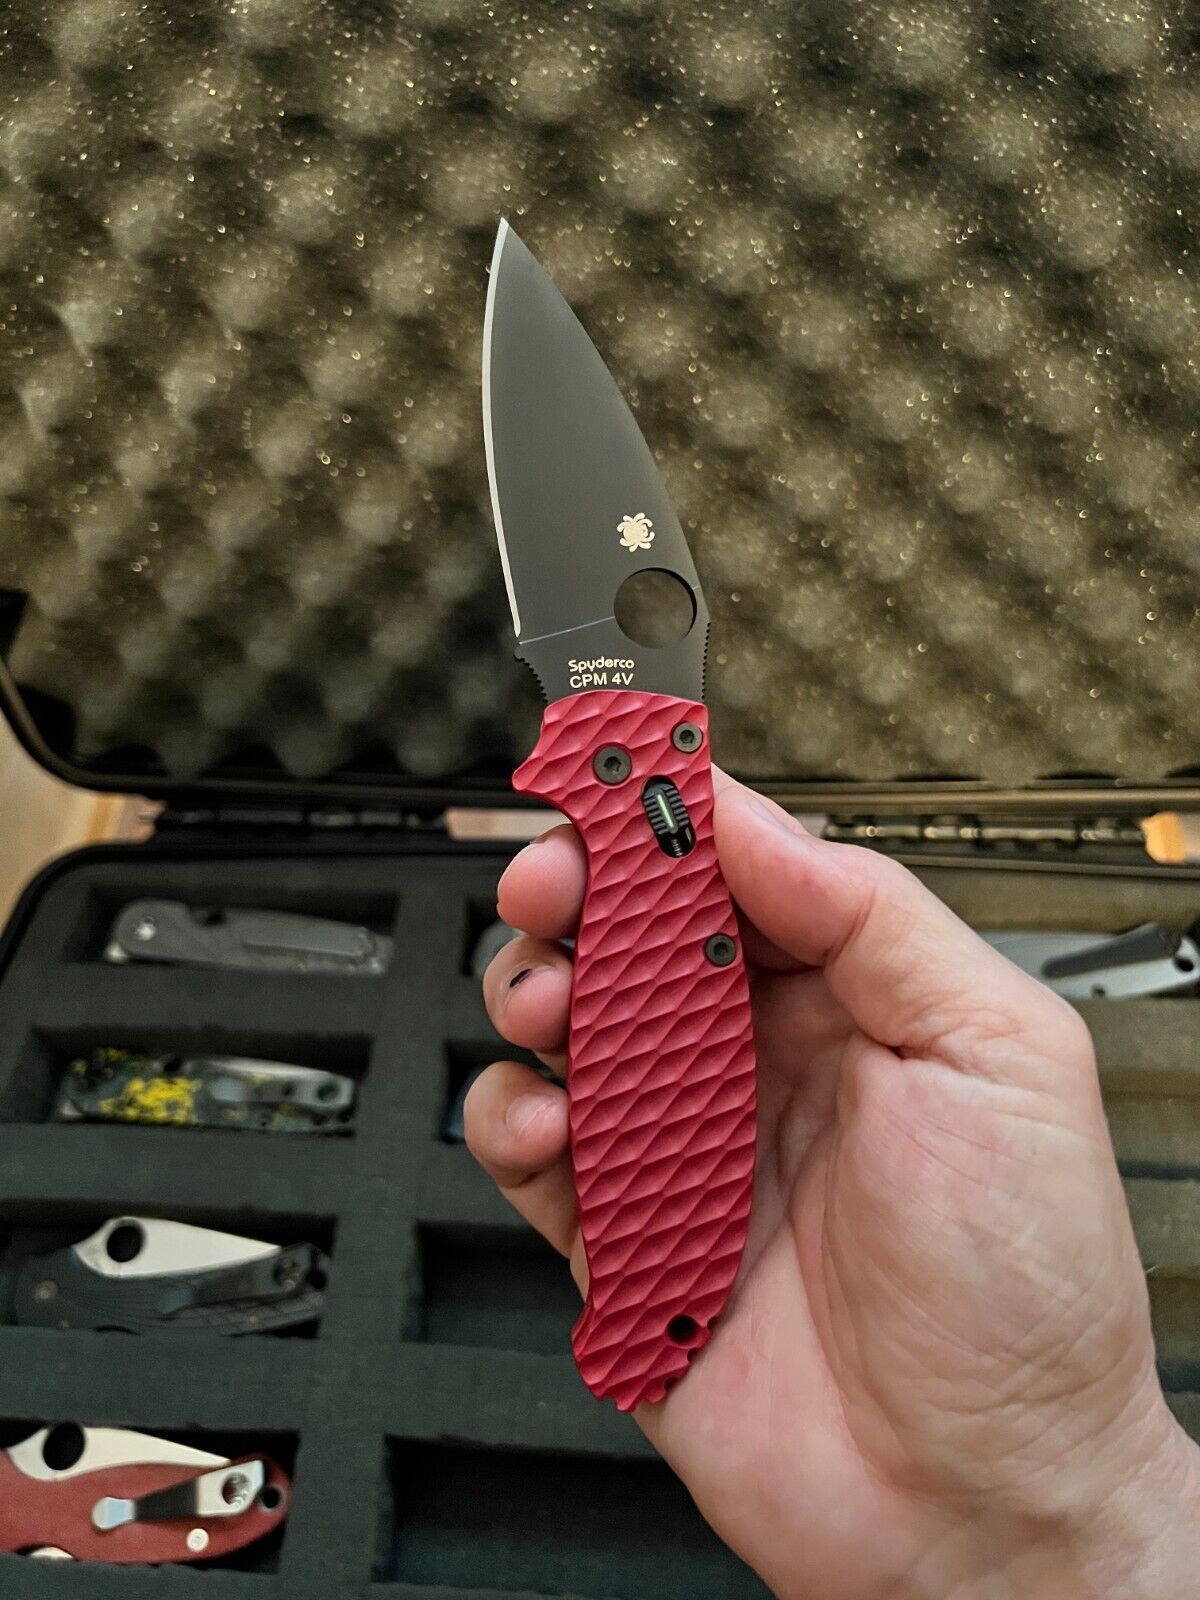 Spyderco Manix 2 Custom Exclusive, DLC 4V, Red Original Goat Scales, and More...